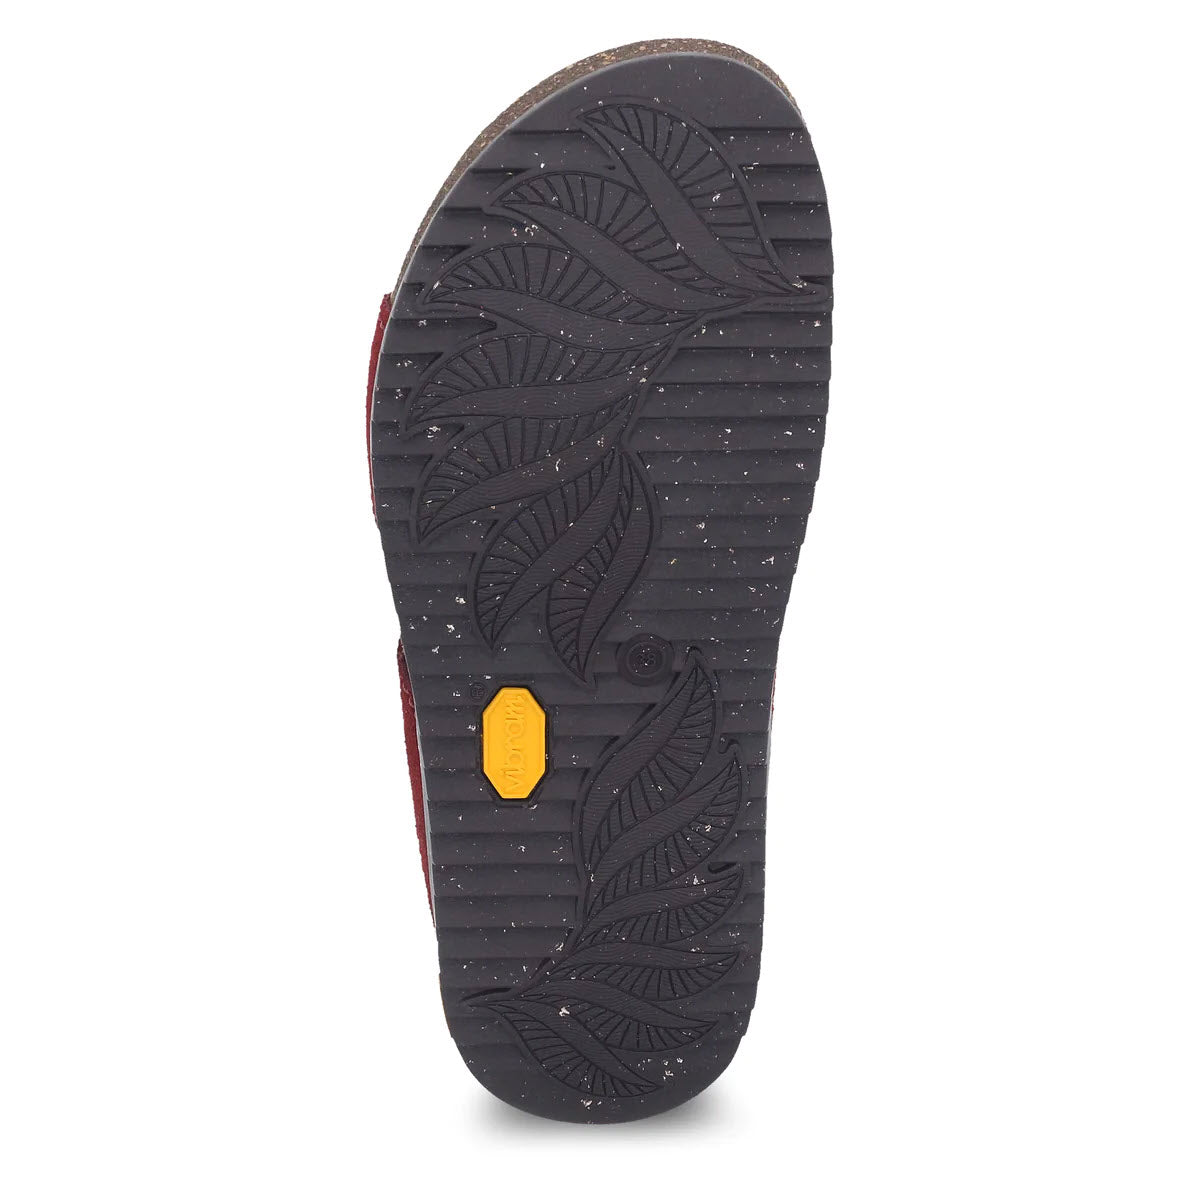 Sole of a shoe with textured leaf pattern and a small yellow rectangular logo on a Dansko ECOSTEP EVO rubber outsole.